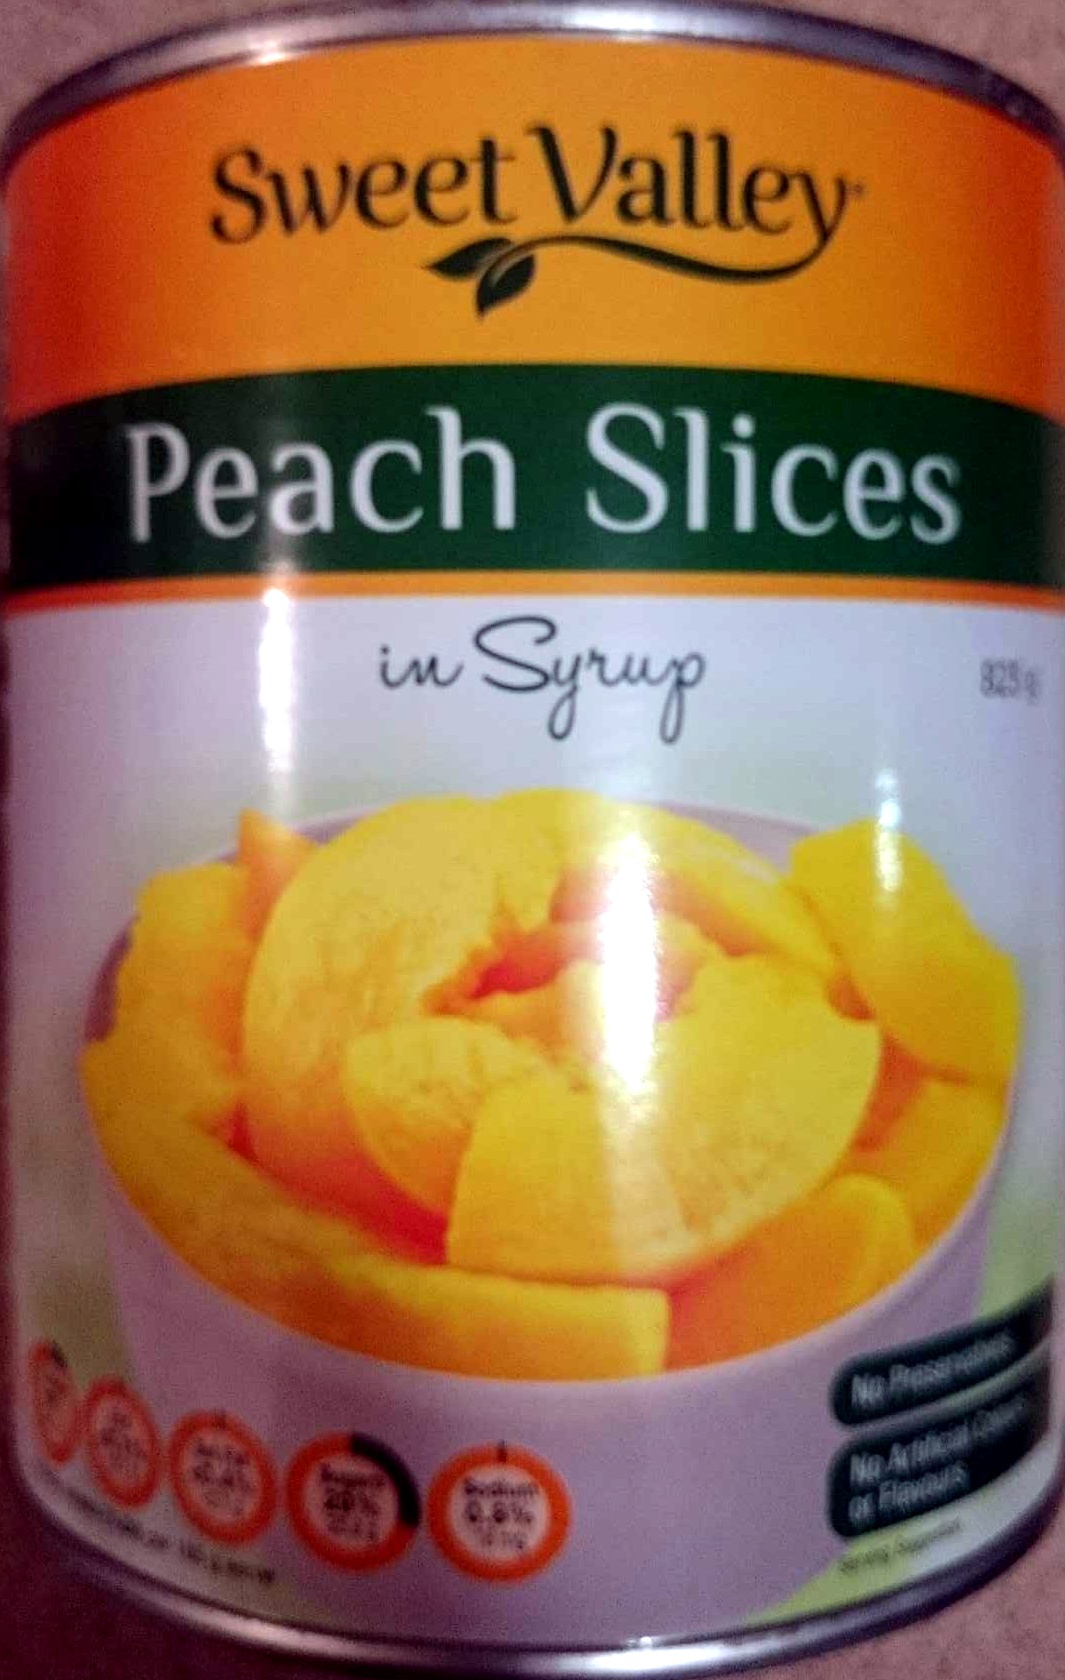 Peach Slices in Syrup - Product